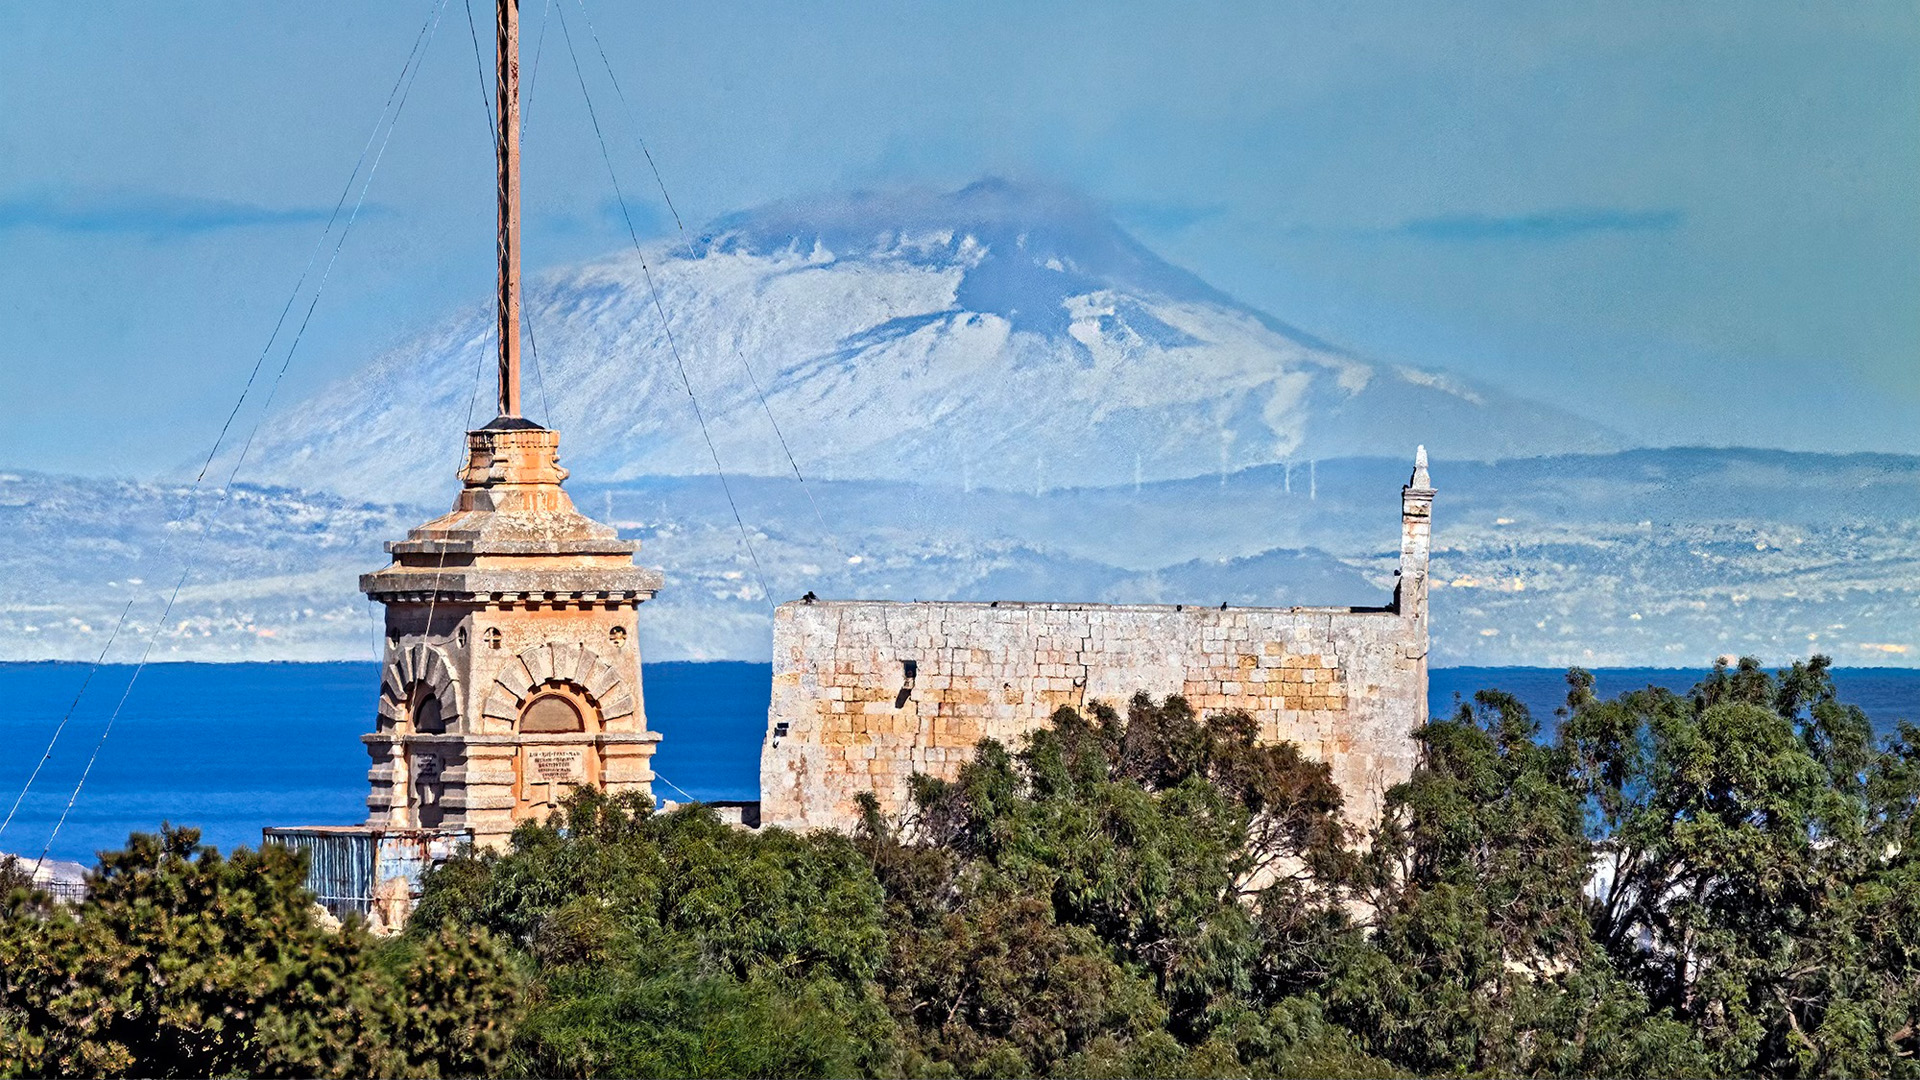 Maltese Photographer Captures Mt. Etna Within Reach In Stunning Photo